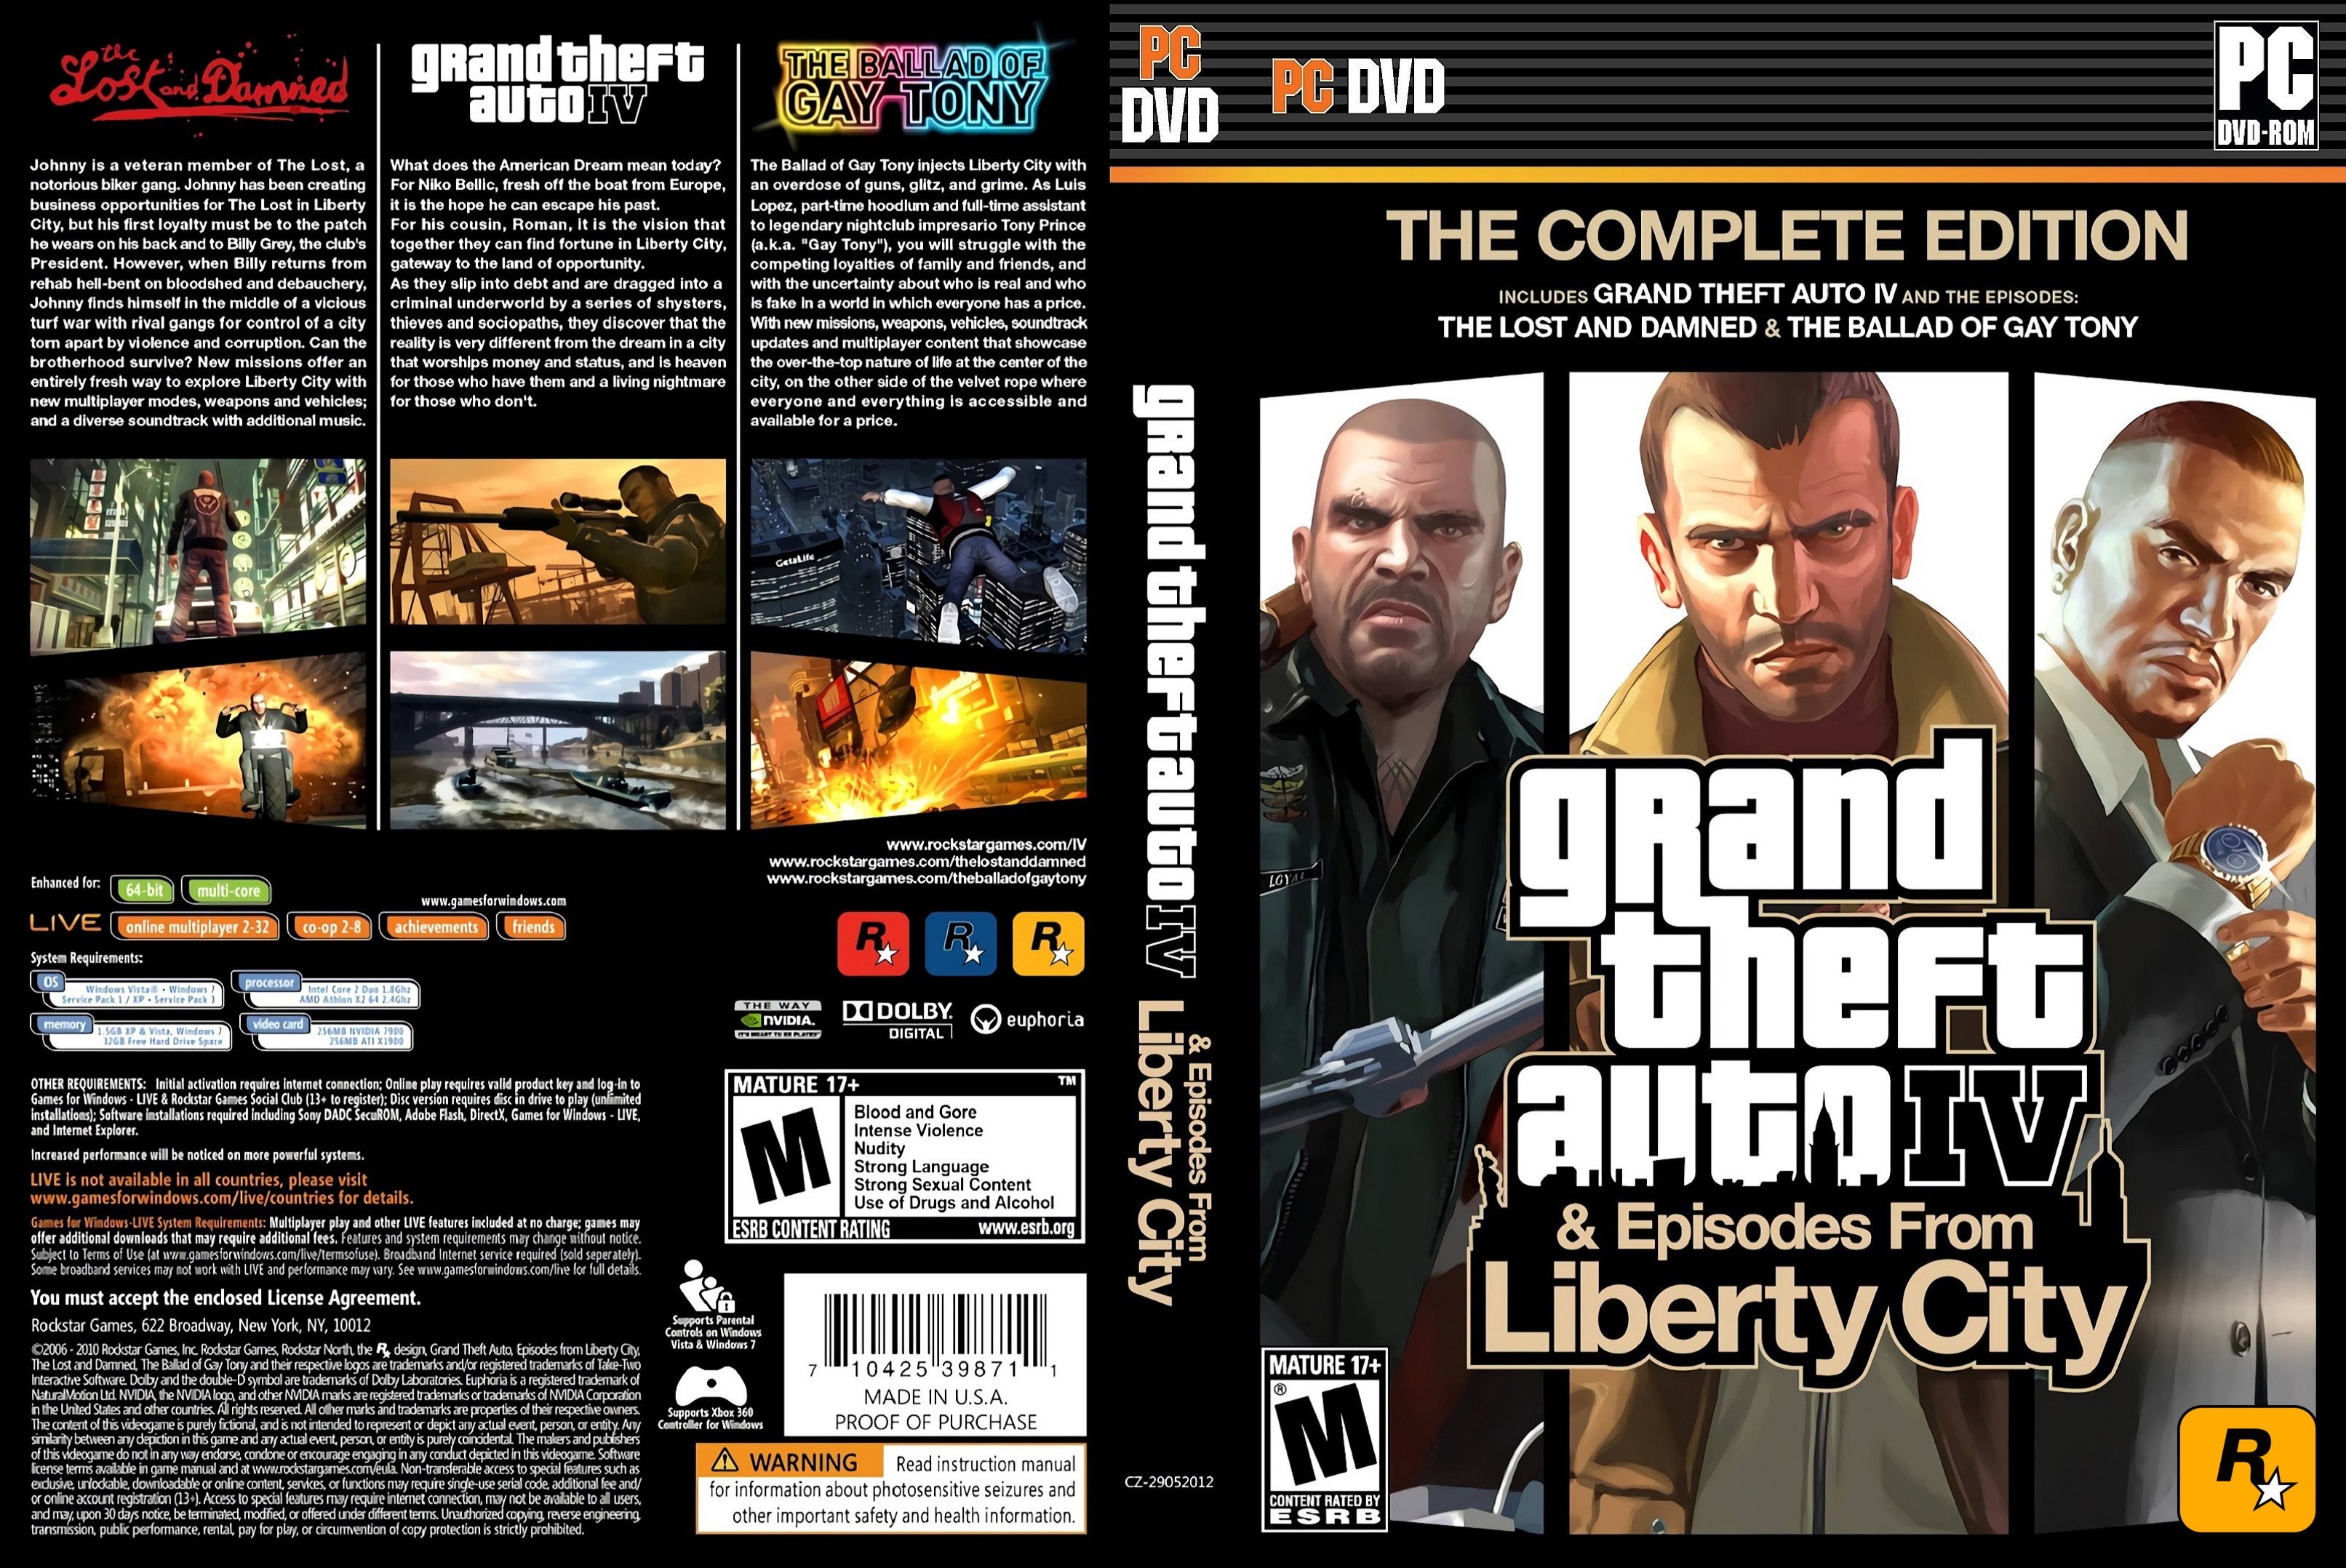 Grand Theft Auto IV The Complete Edition - PC.jpg